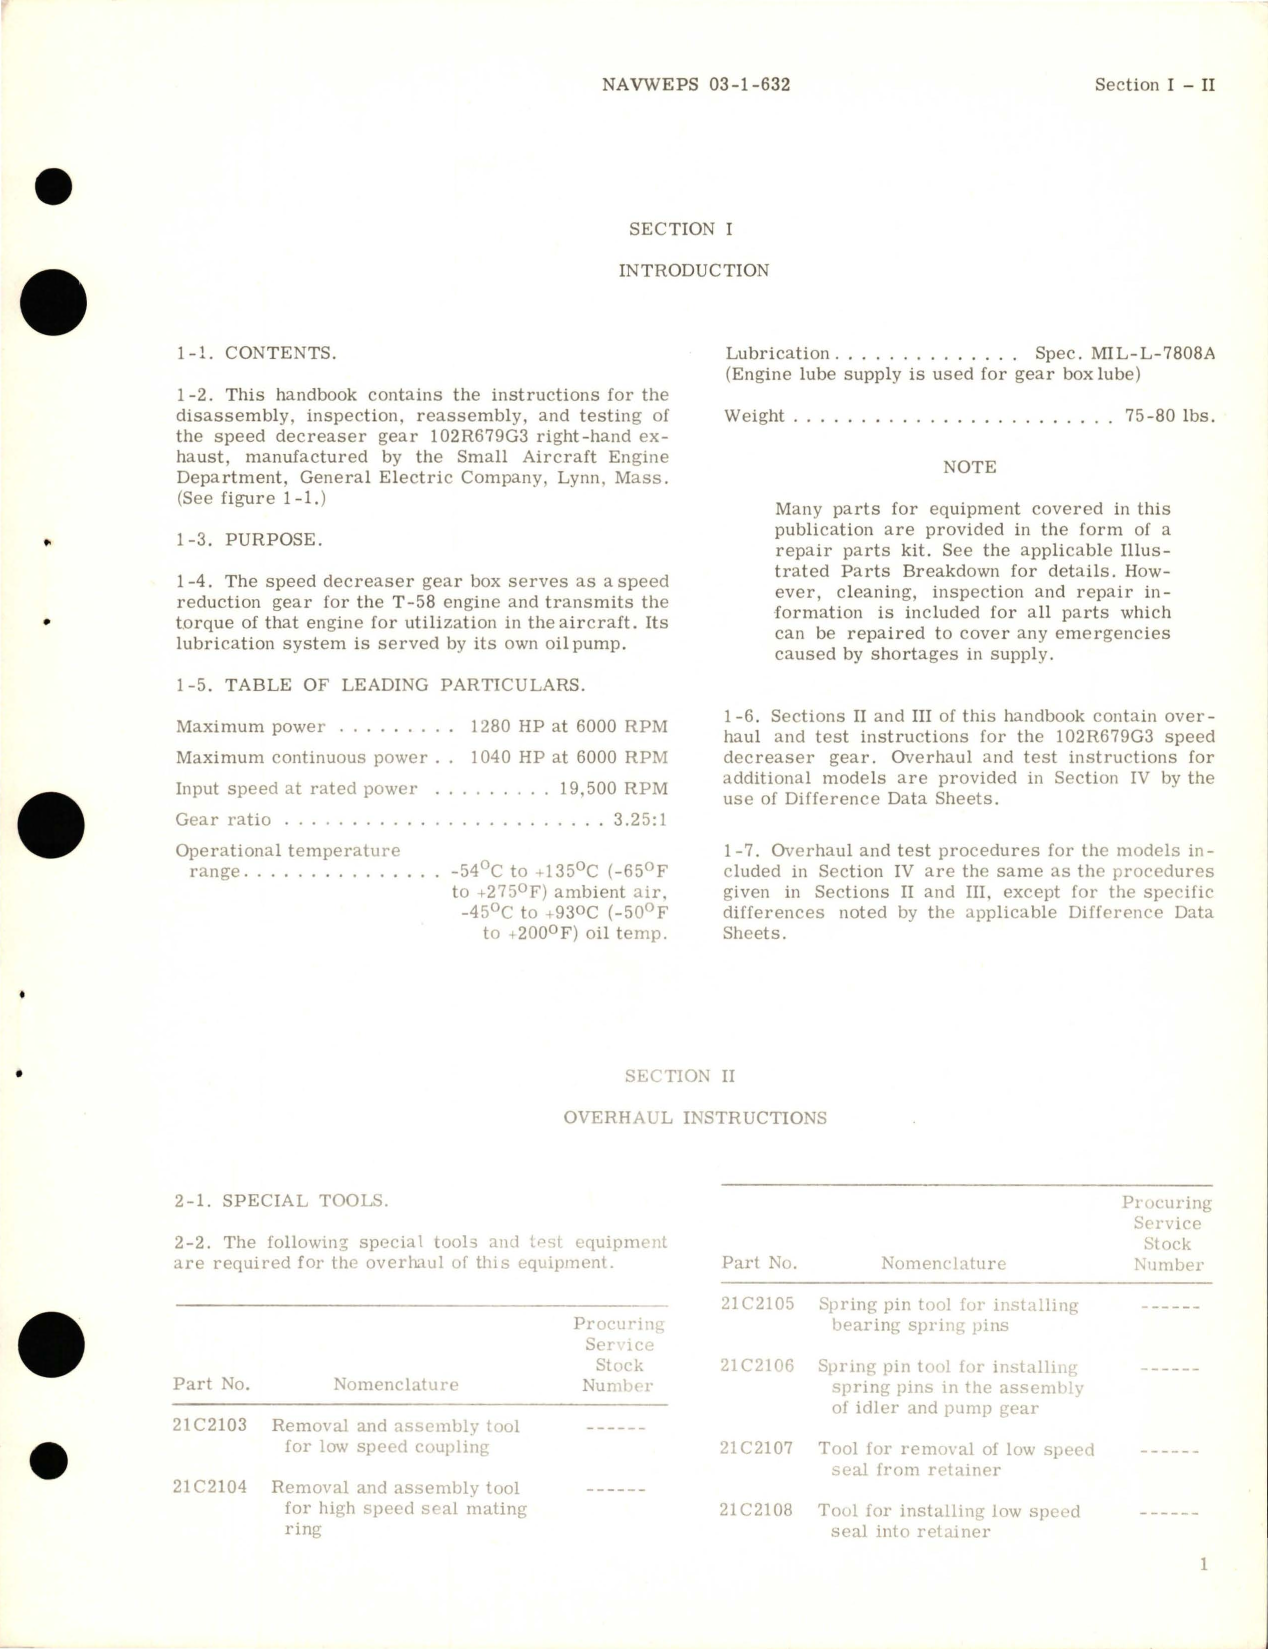 Sample page 5 from AirCorps Library document: Overhaul Instructions for Speed Decreaser Gear and Associated Parts - Parts 102R679G3, 102R678G3, and 102R678G6 for T-58 Engine 